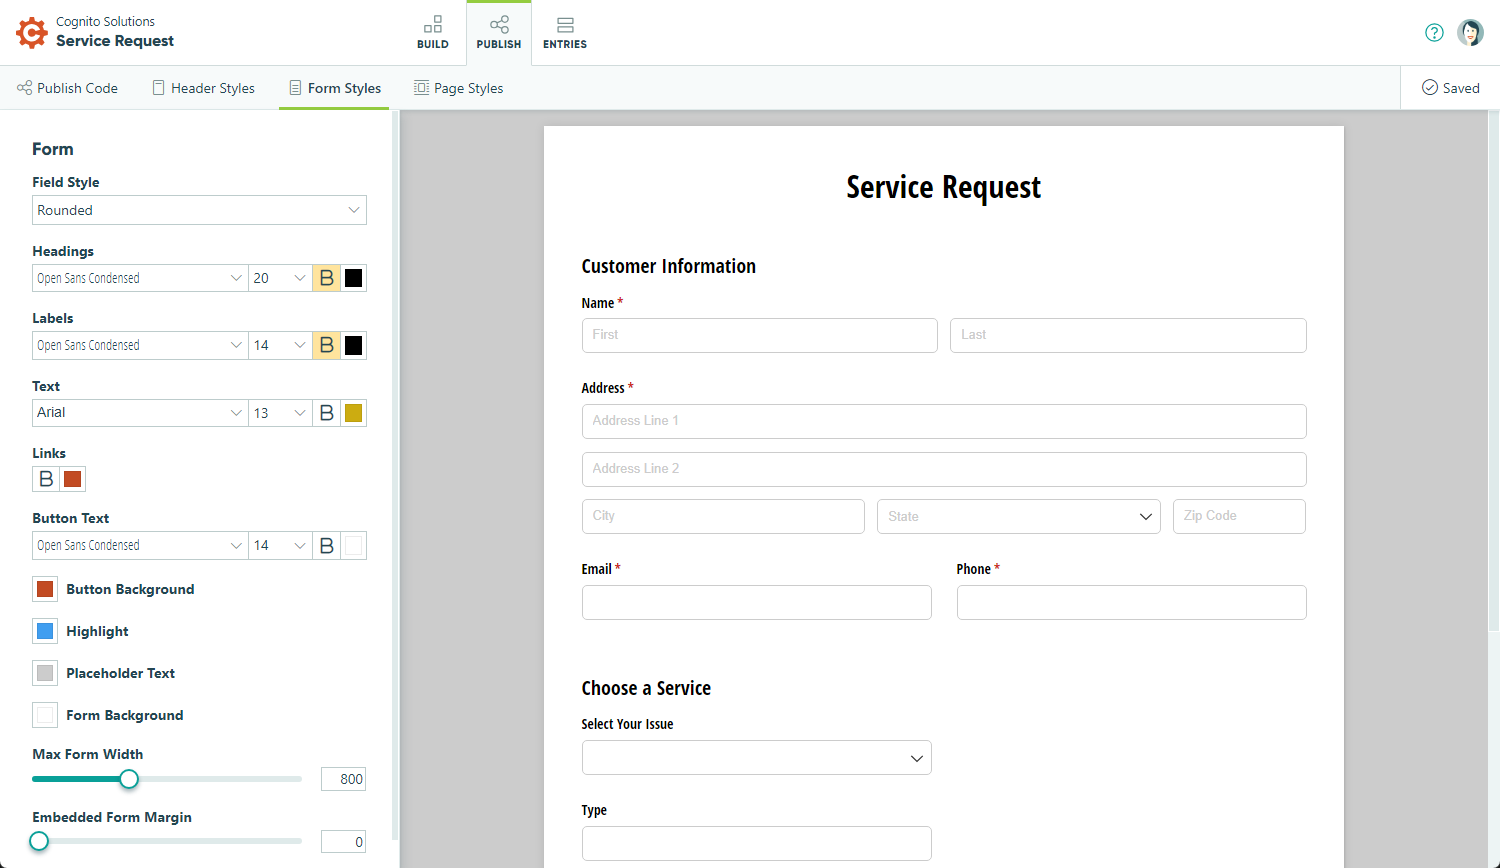 From the Publish page of your form builder, you can customize the styling of your form and then share it with the world.